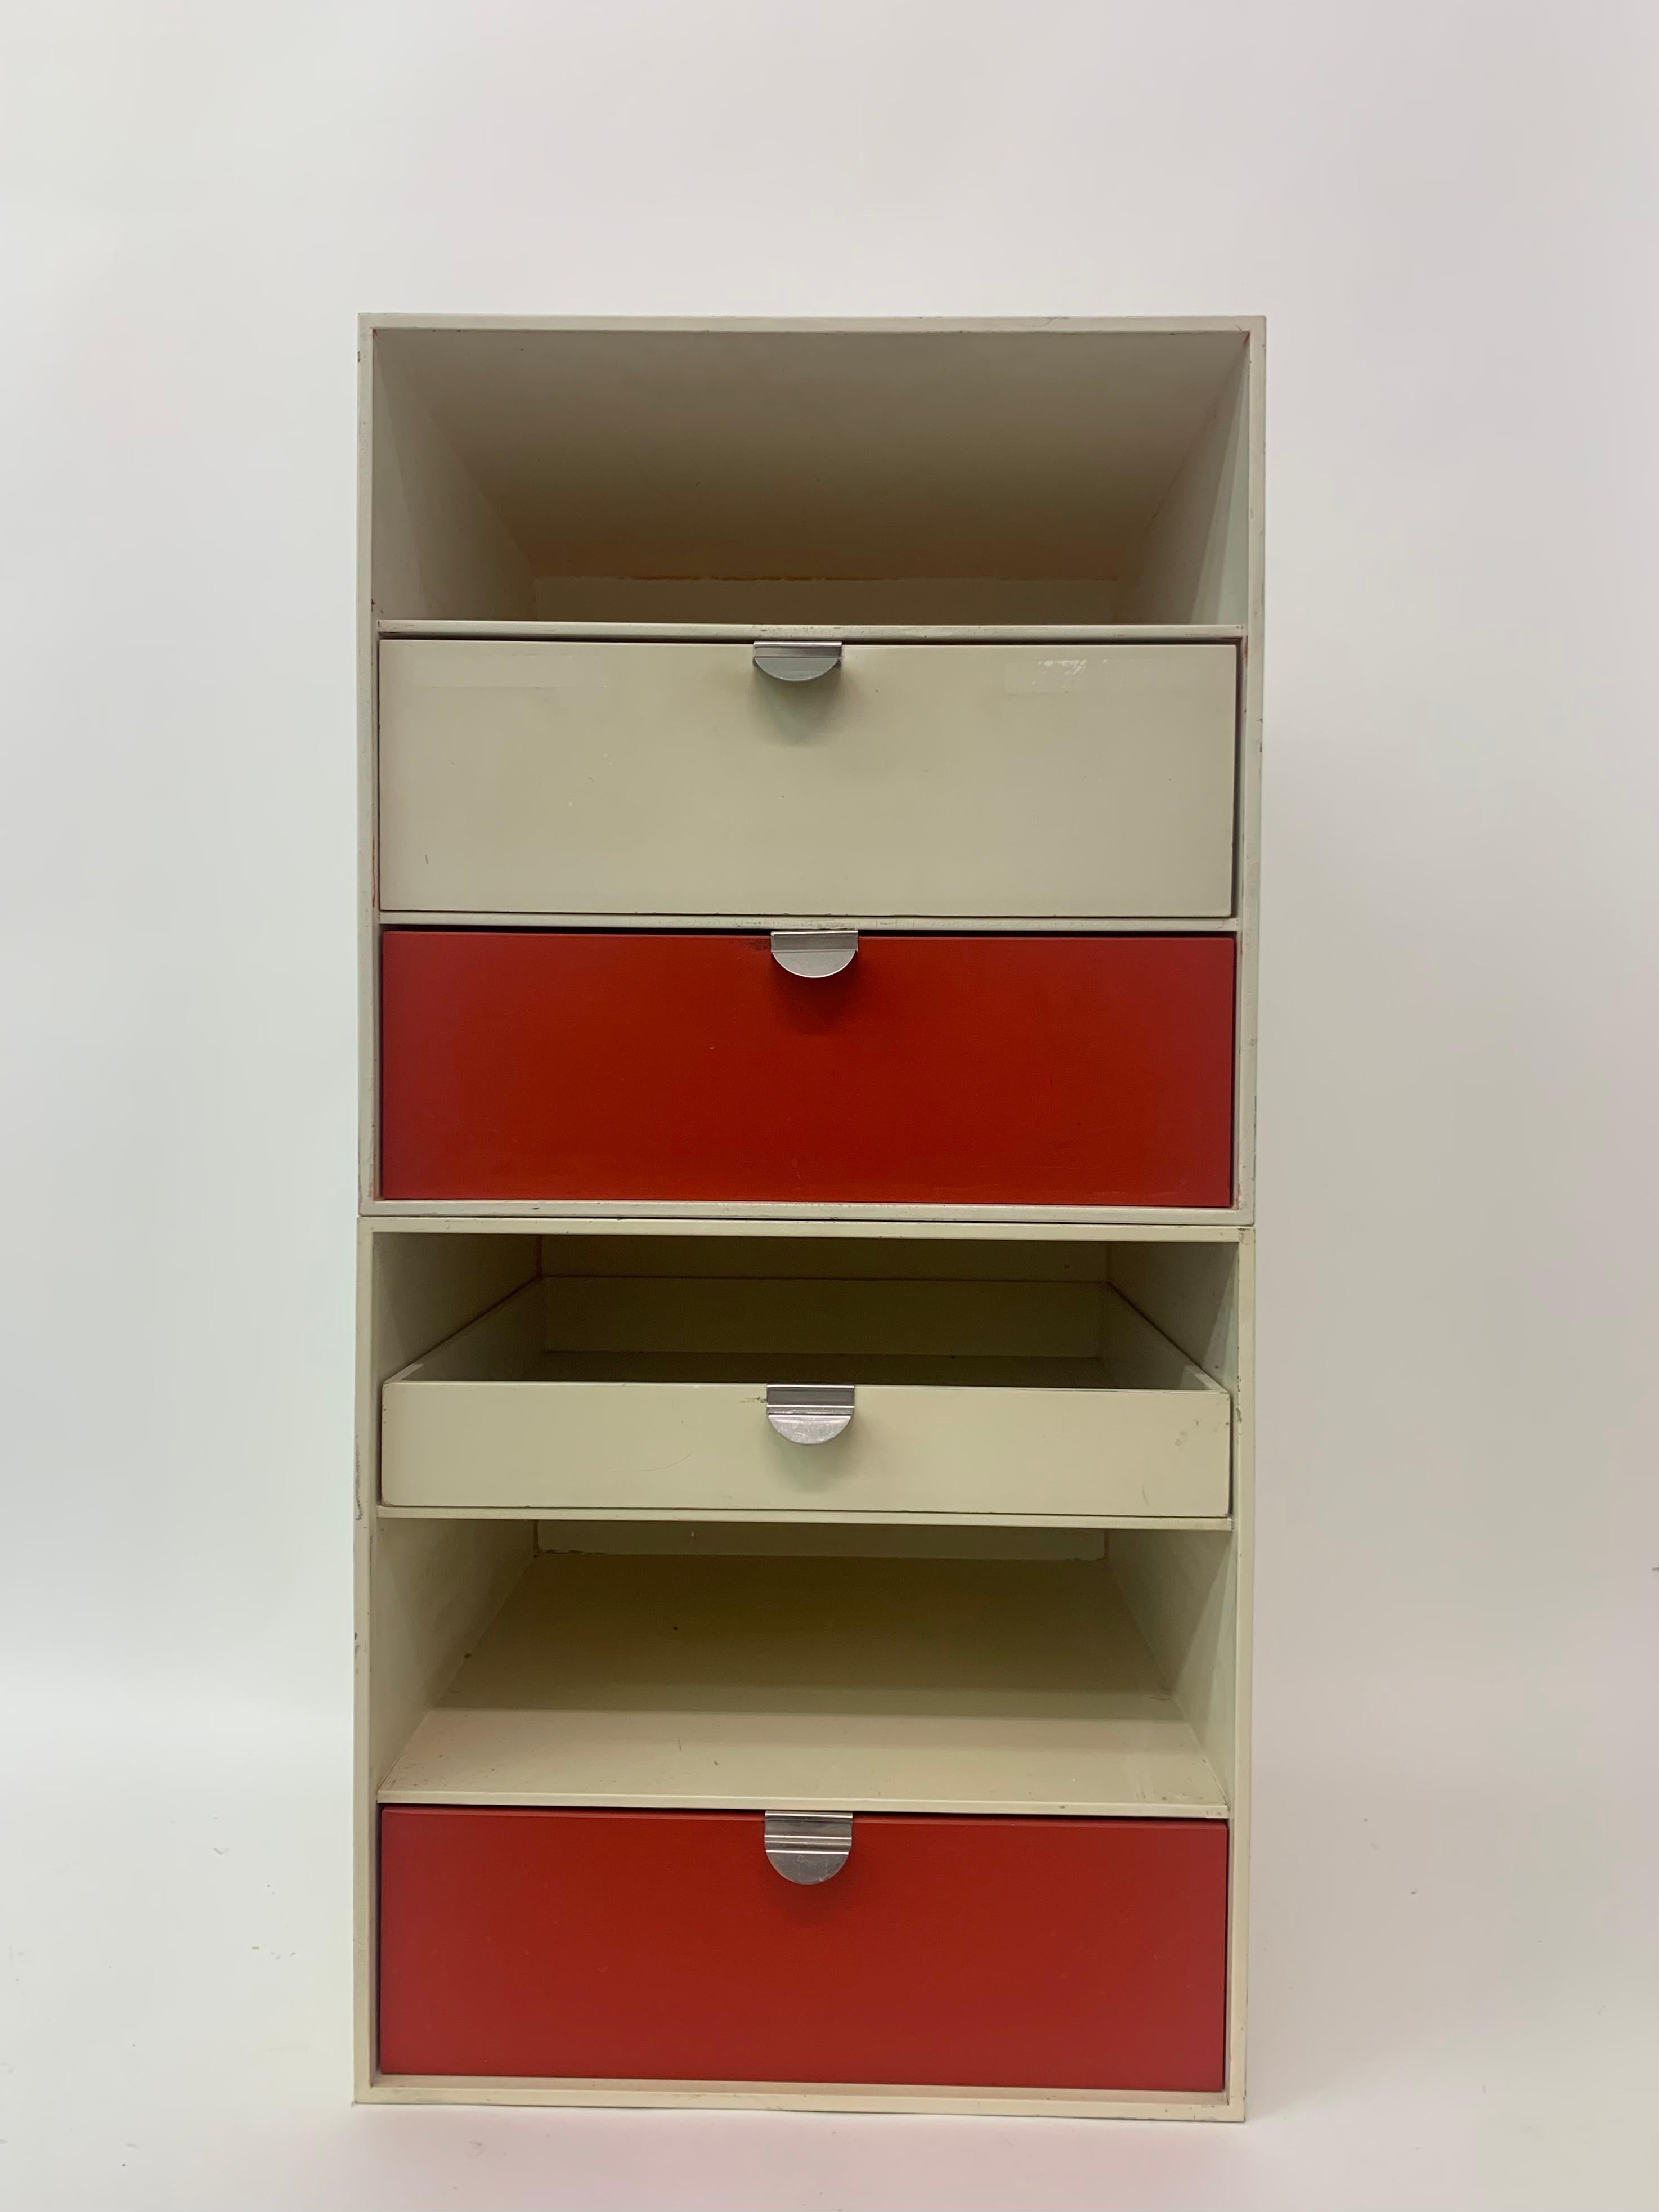 Palaset stackable box by Ristomatti Ratia for Treston Oy Finland, 1970s

Modular cabinets.